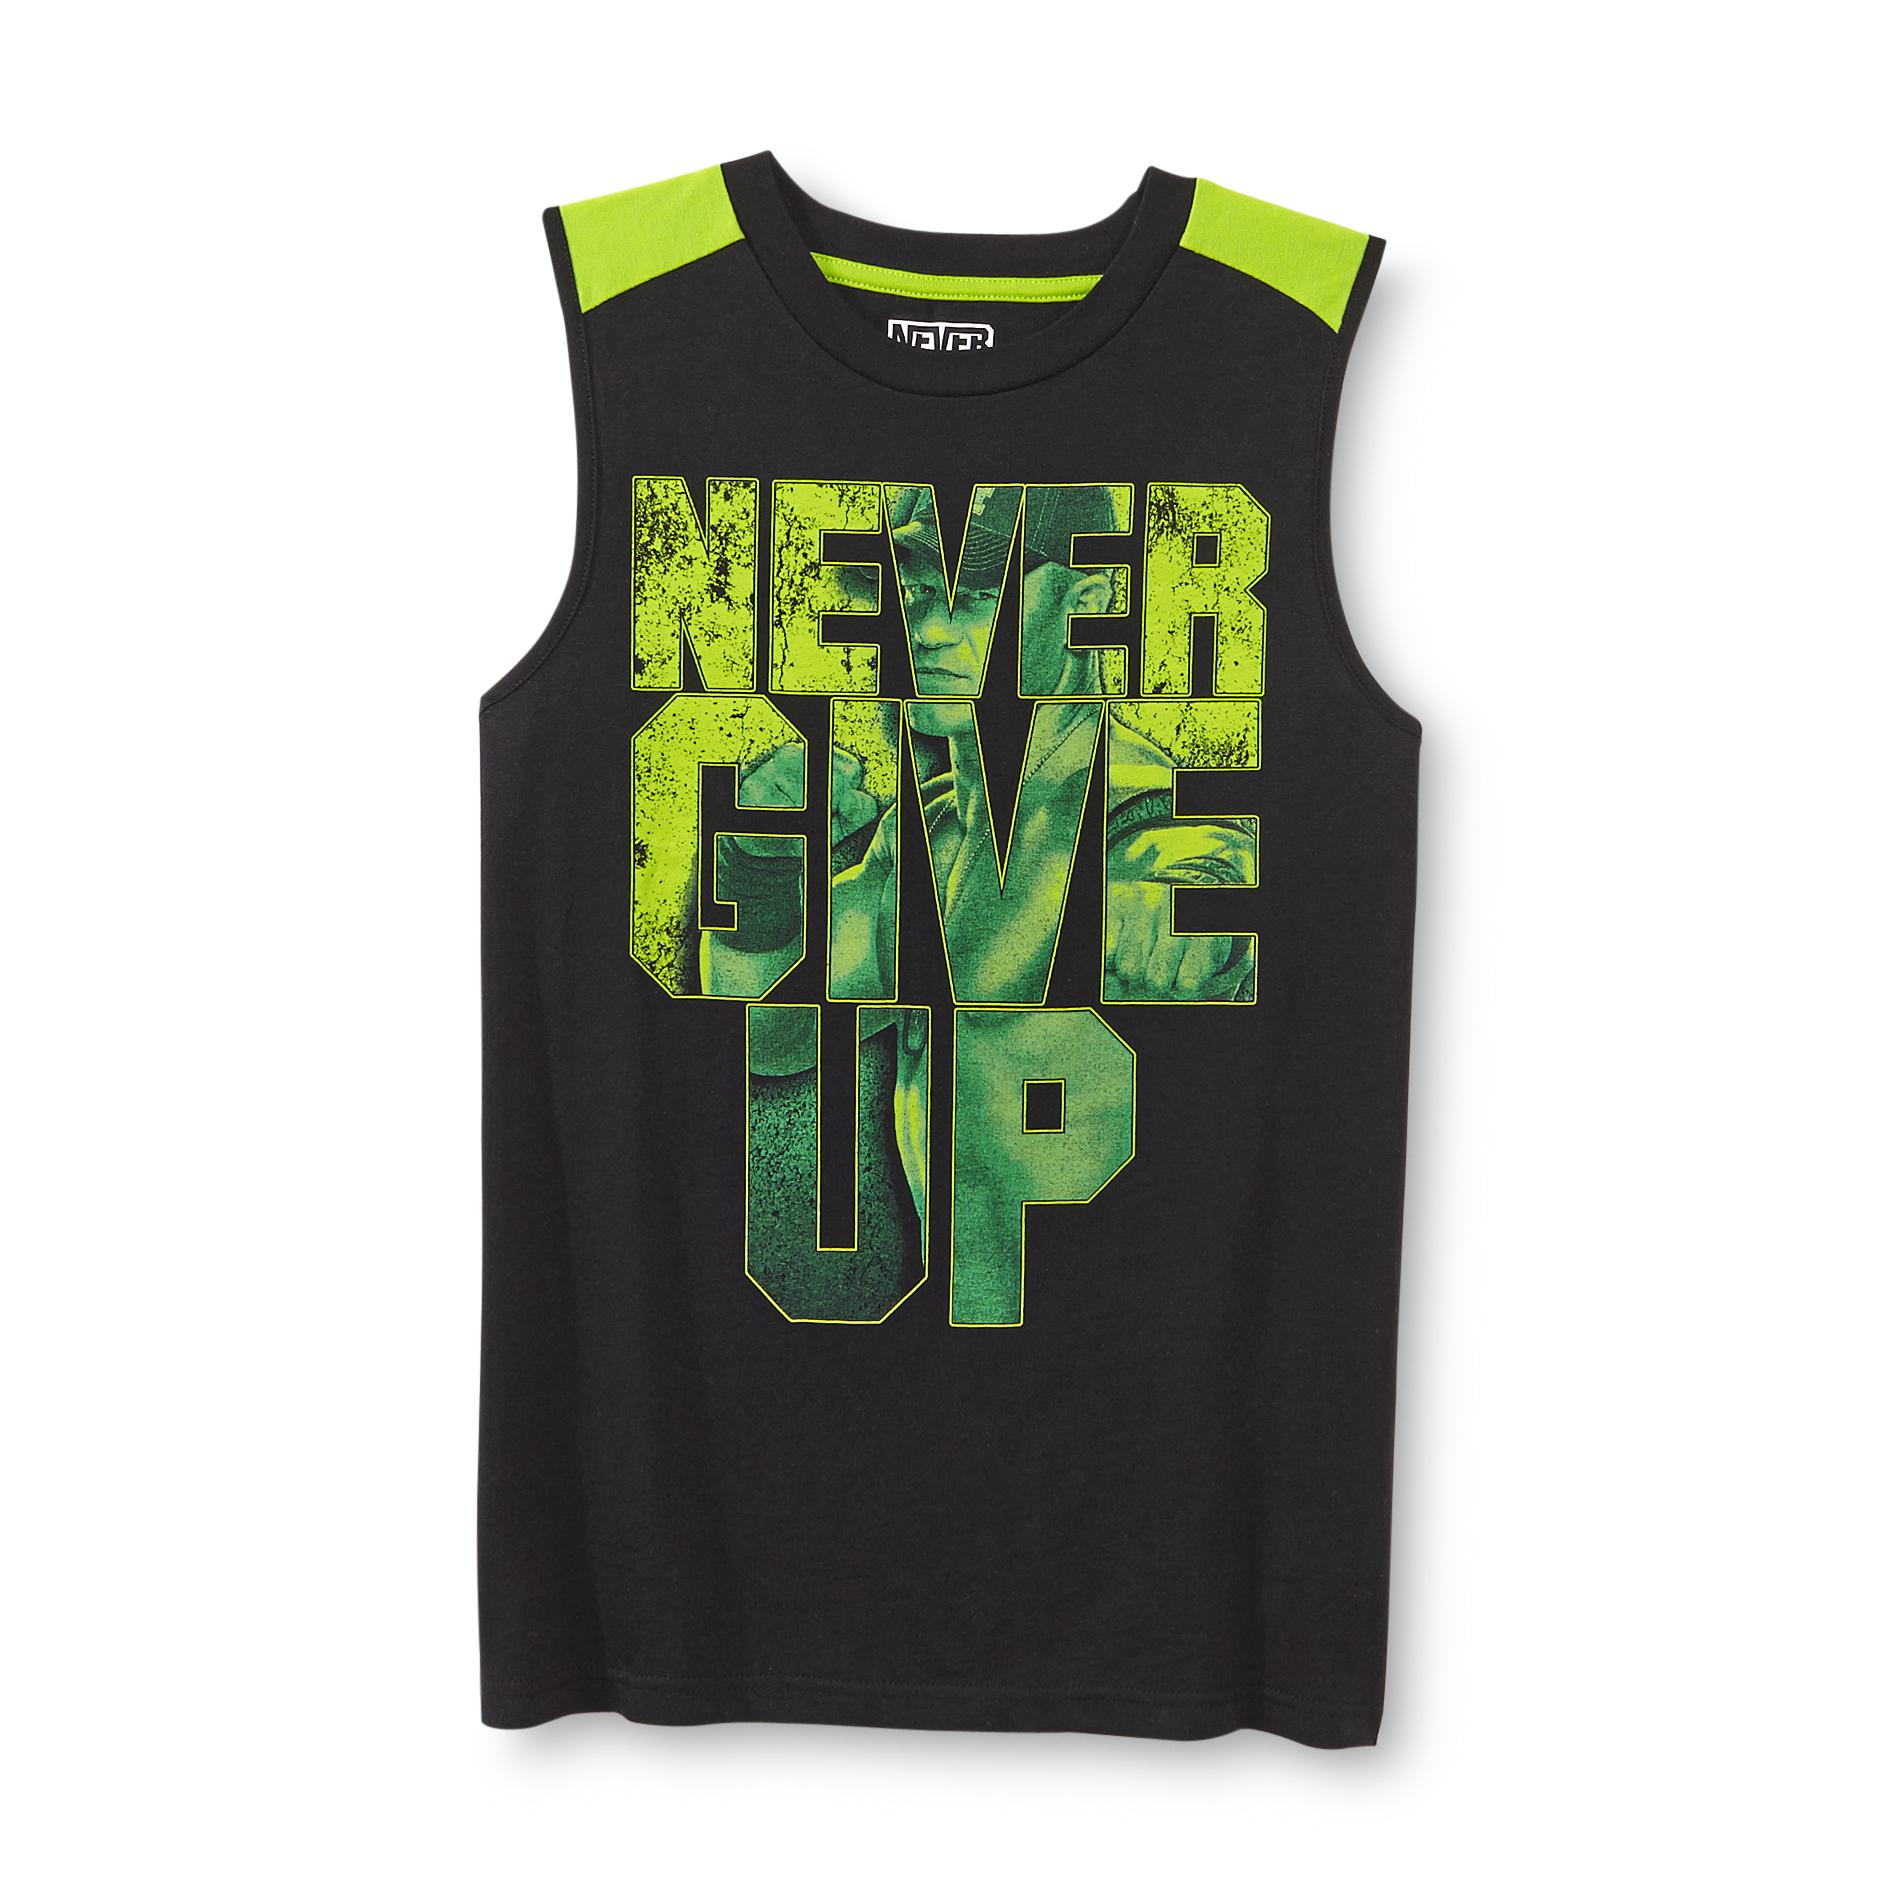 Never Give Up By John Cena Boy's Graphic Tank Top